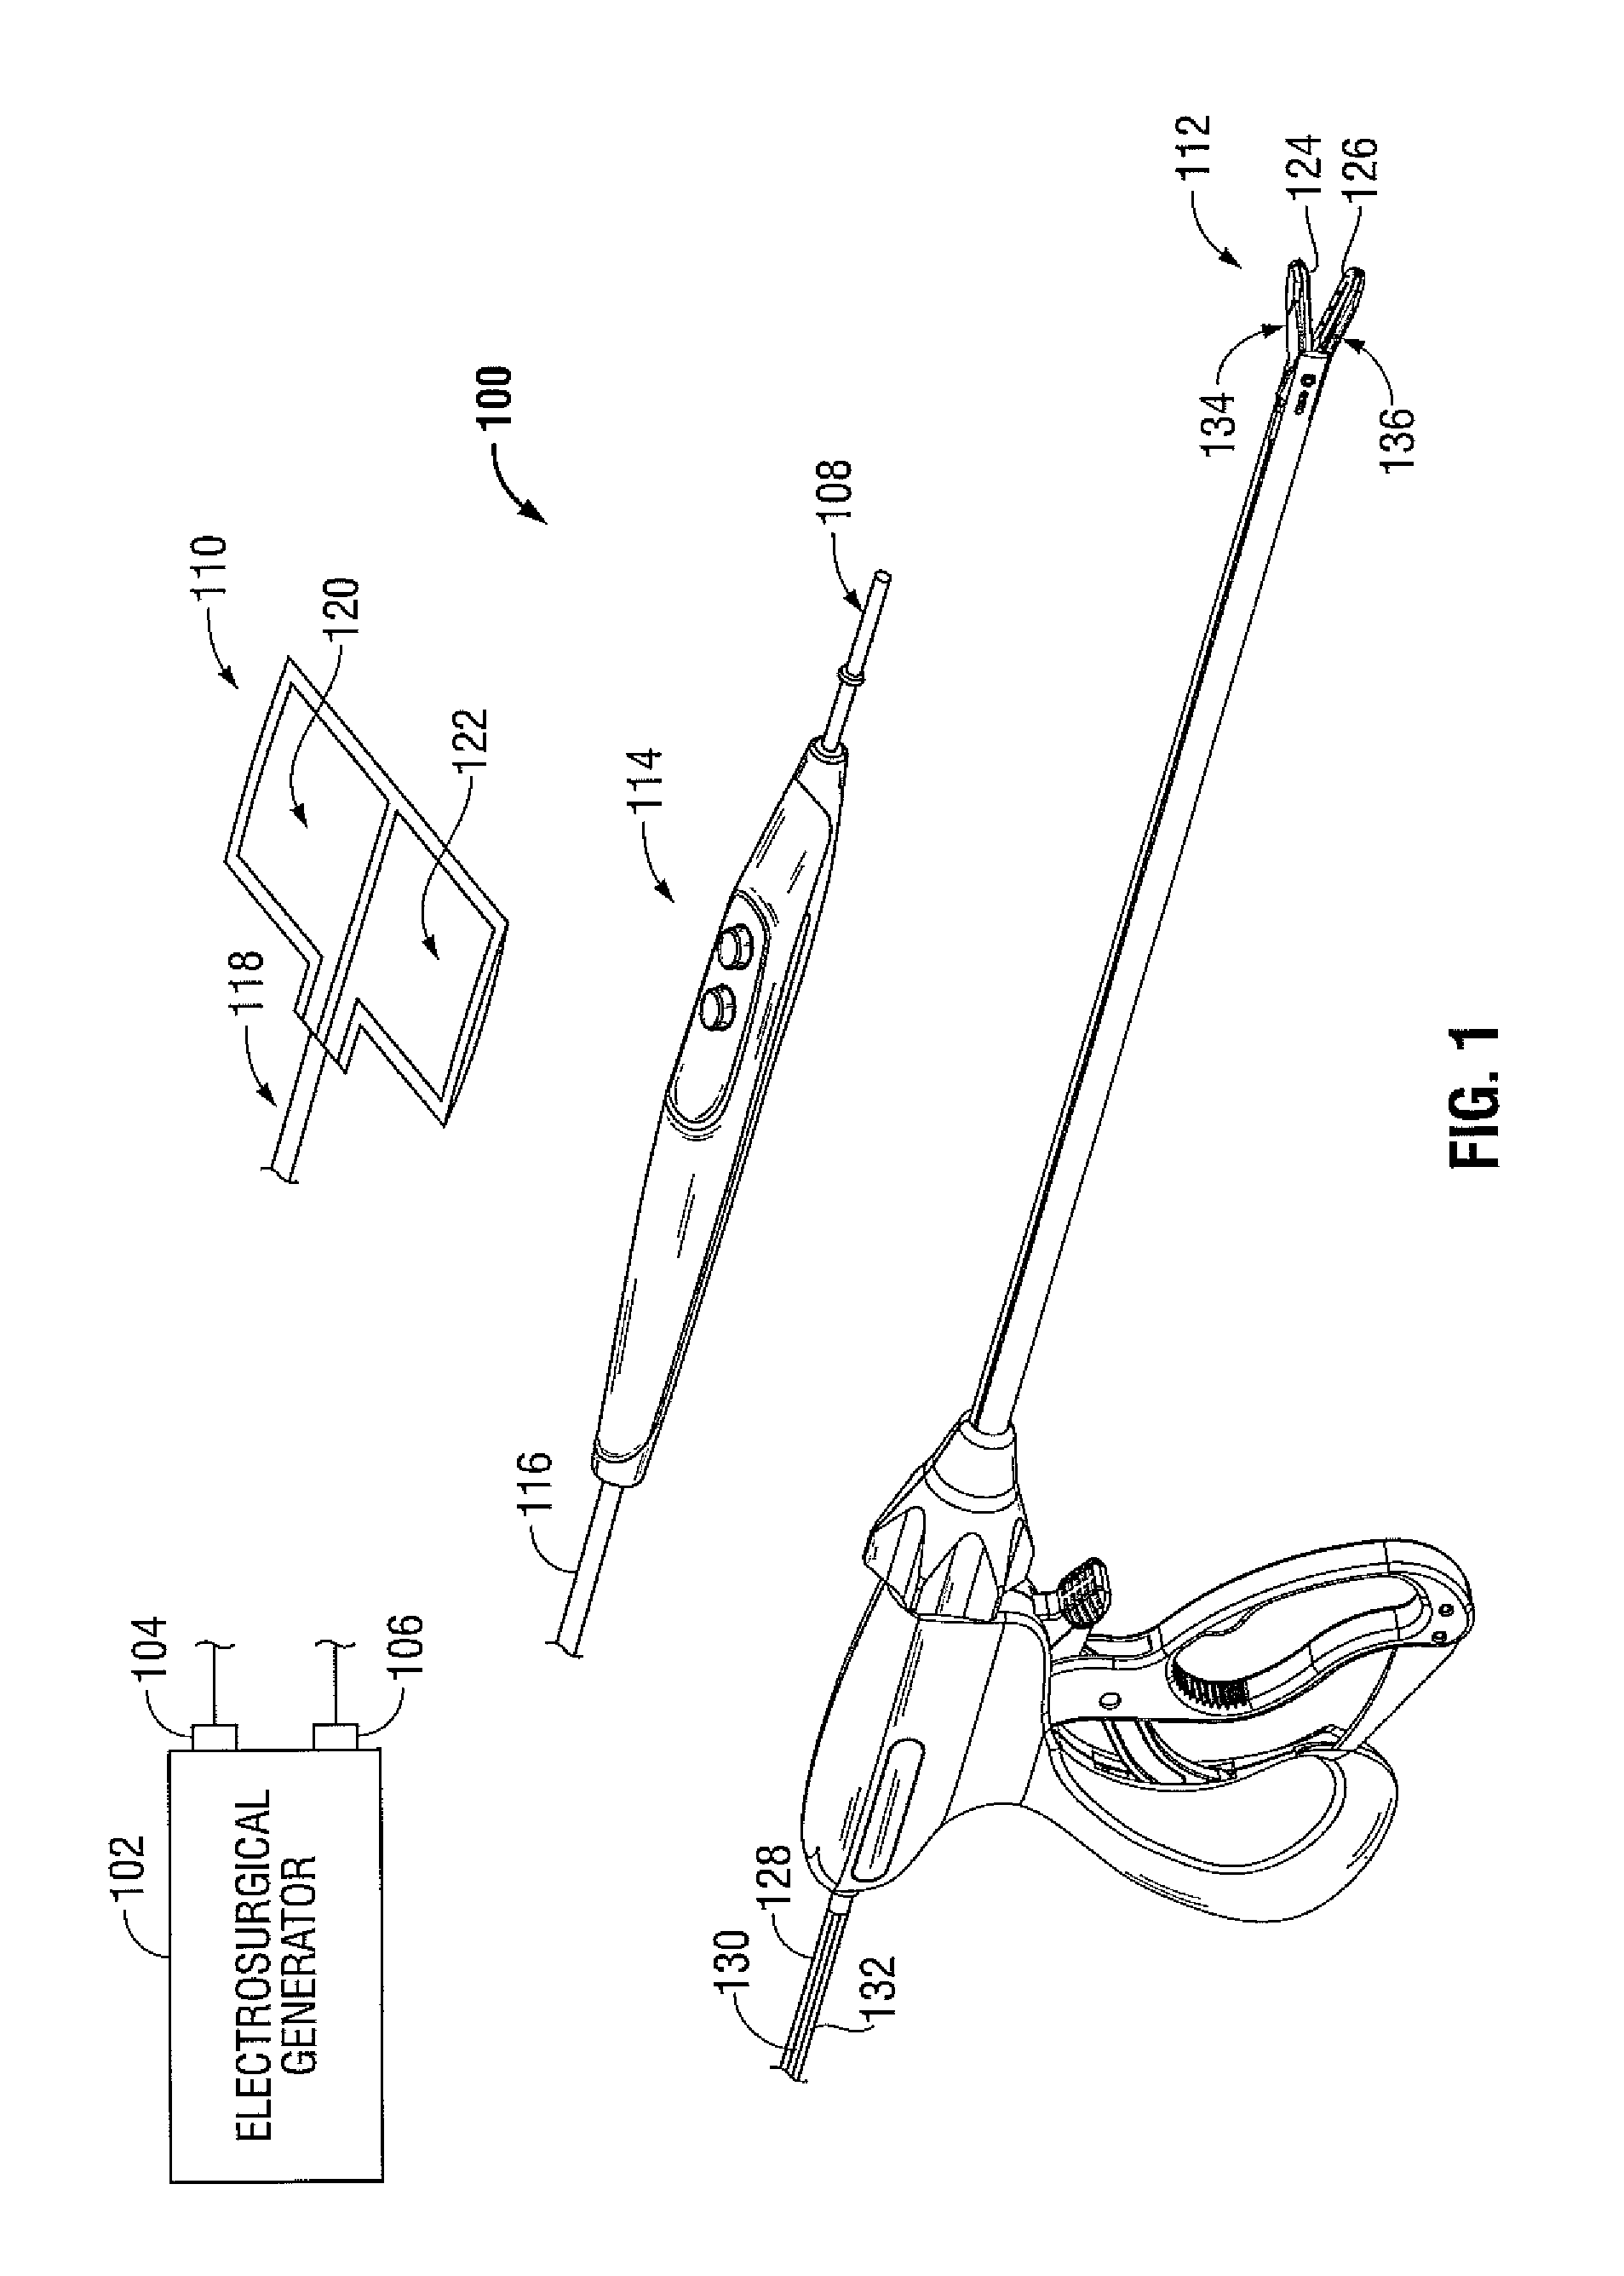 Systems and Methods for Calibrating Power Measurements in an Electrosurgical Generator